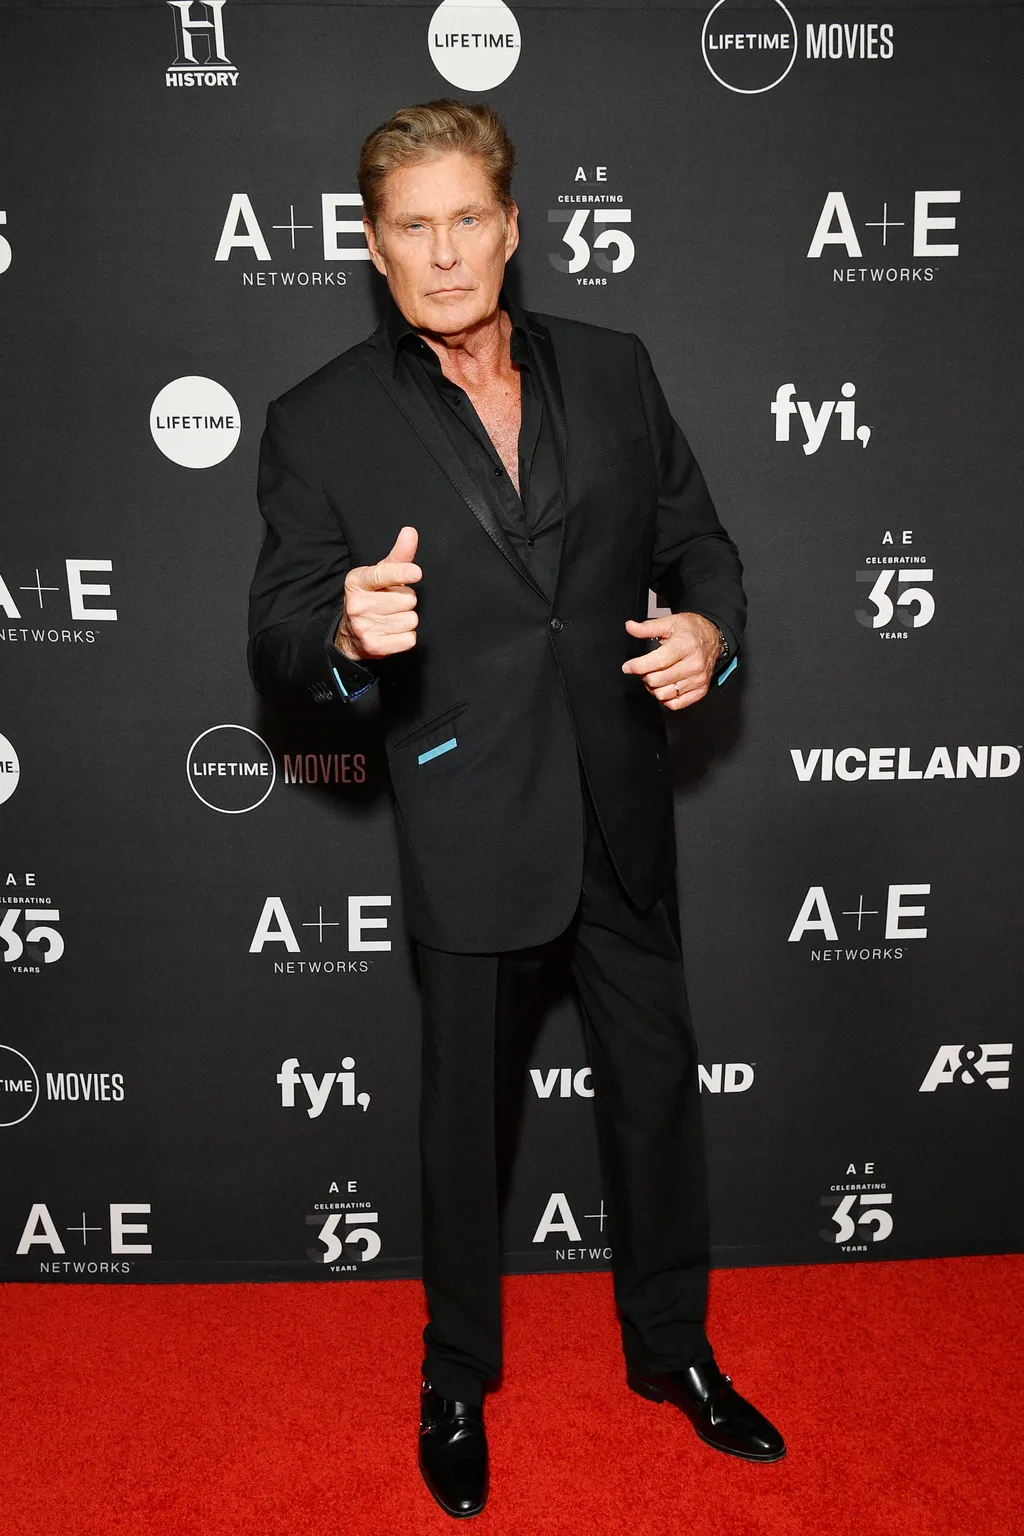 2019 A+E Networks Upfront GettyImageRank2 JAZZ VERTICAL USA New York City Lincoln Center Photography David Hasselhoff Arts Culture and Entertainment Attending E! Celebrities E! Upfront A-List Celebrity PersonalityInQueue 